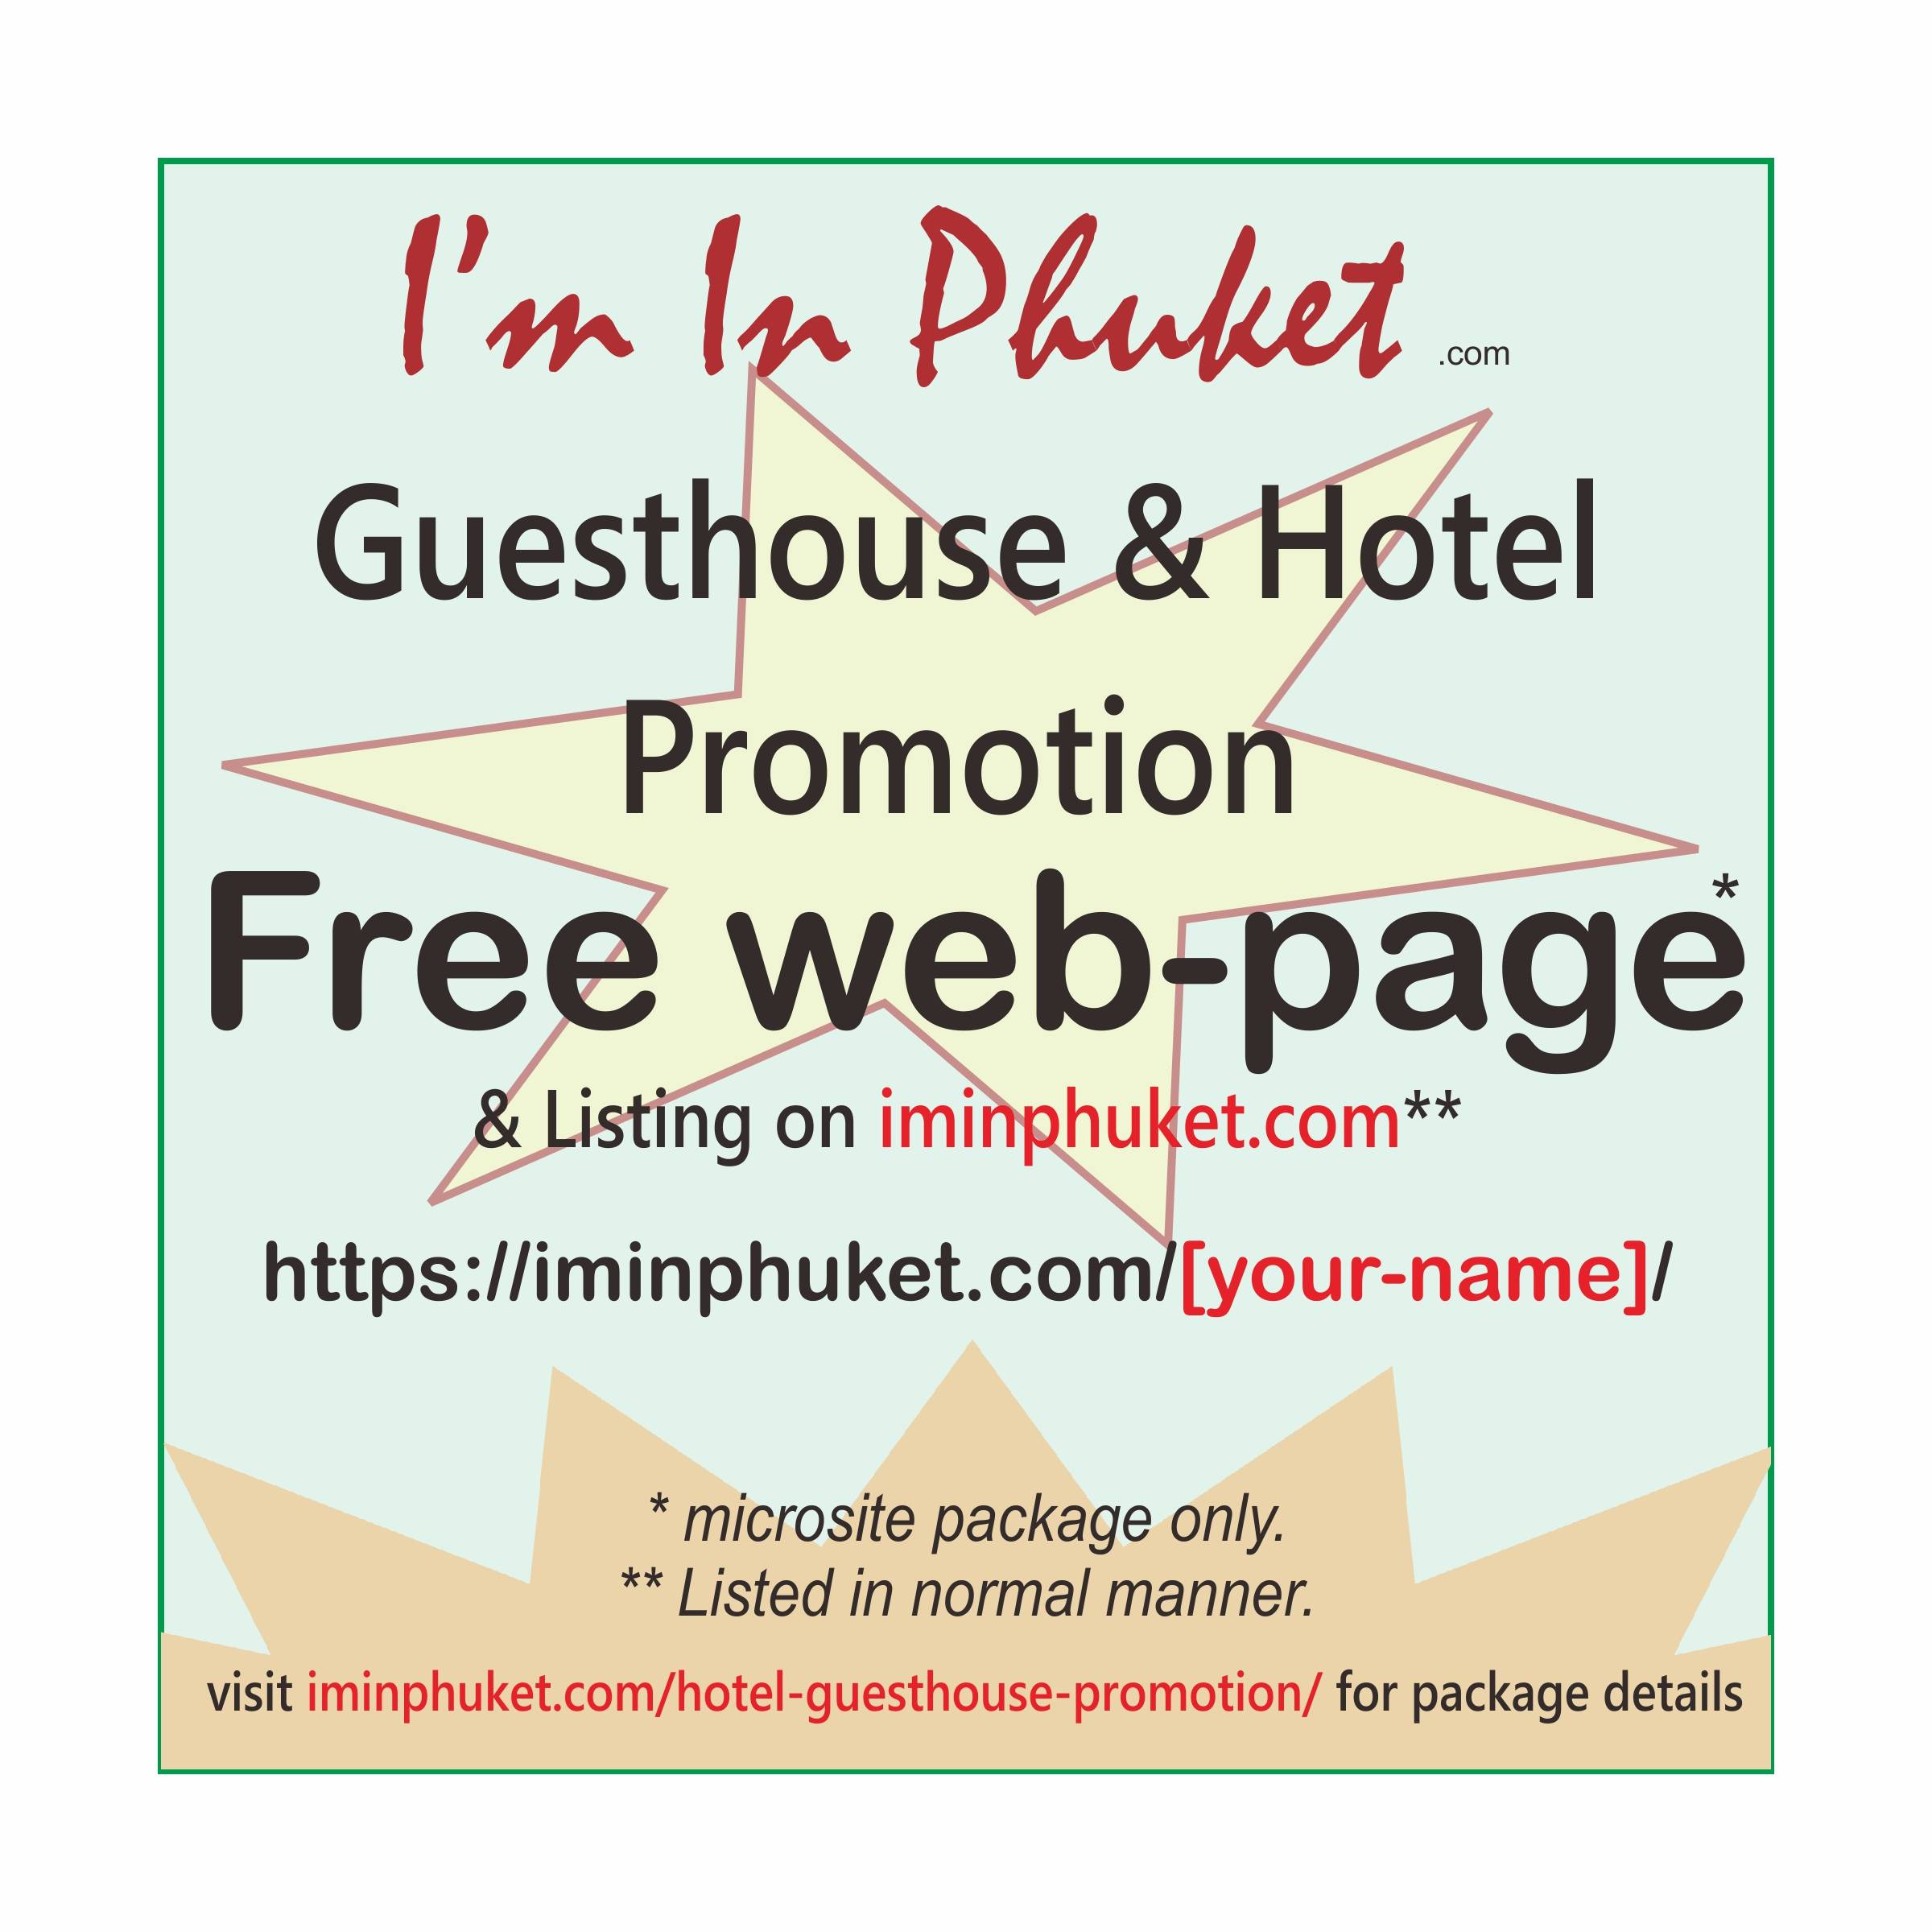 Hotel Guesthouse promotion